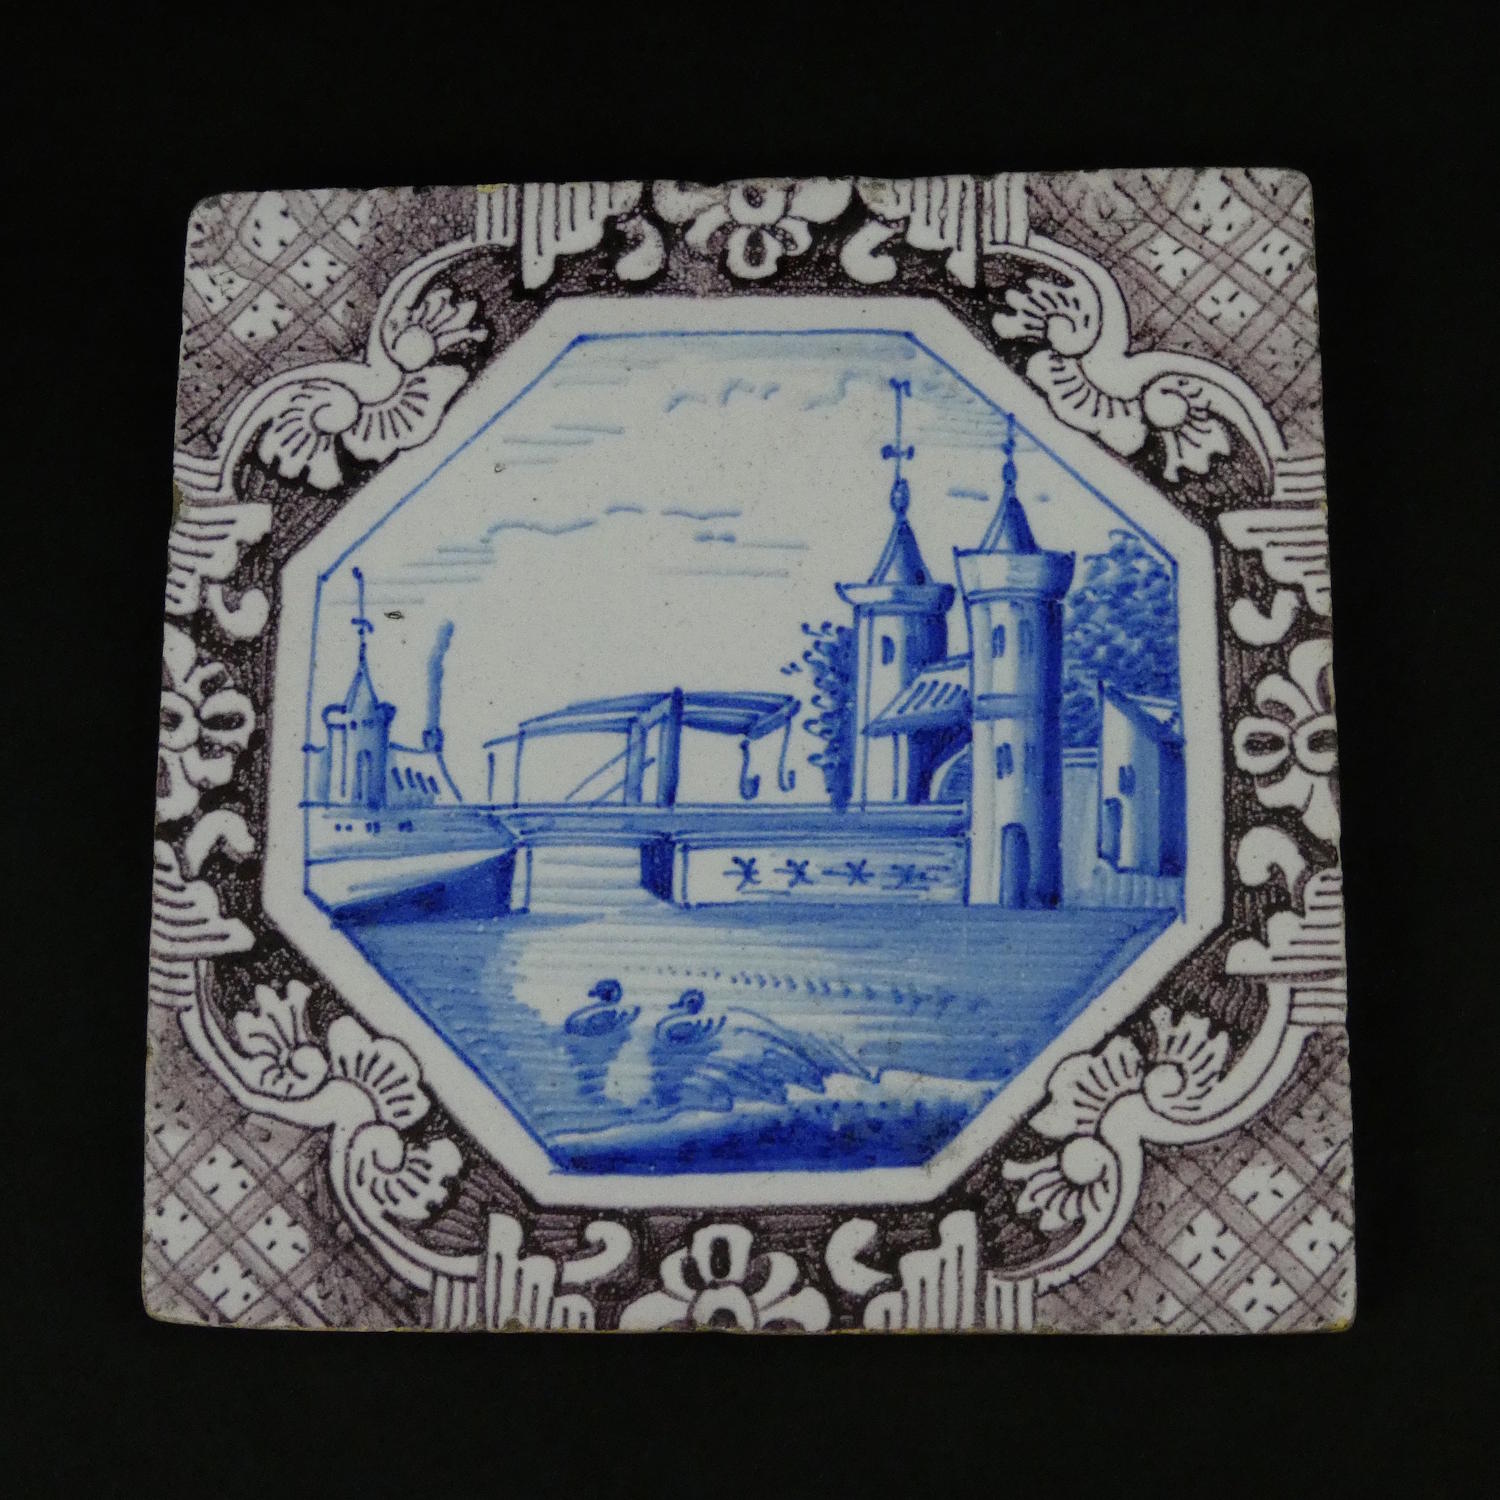 Manganese and Blue Delft Tile